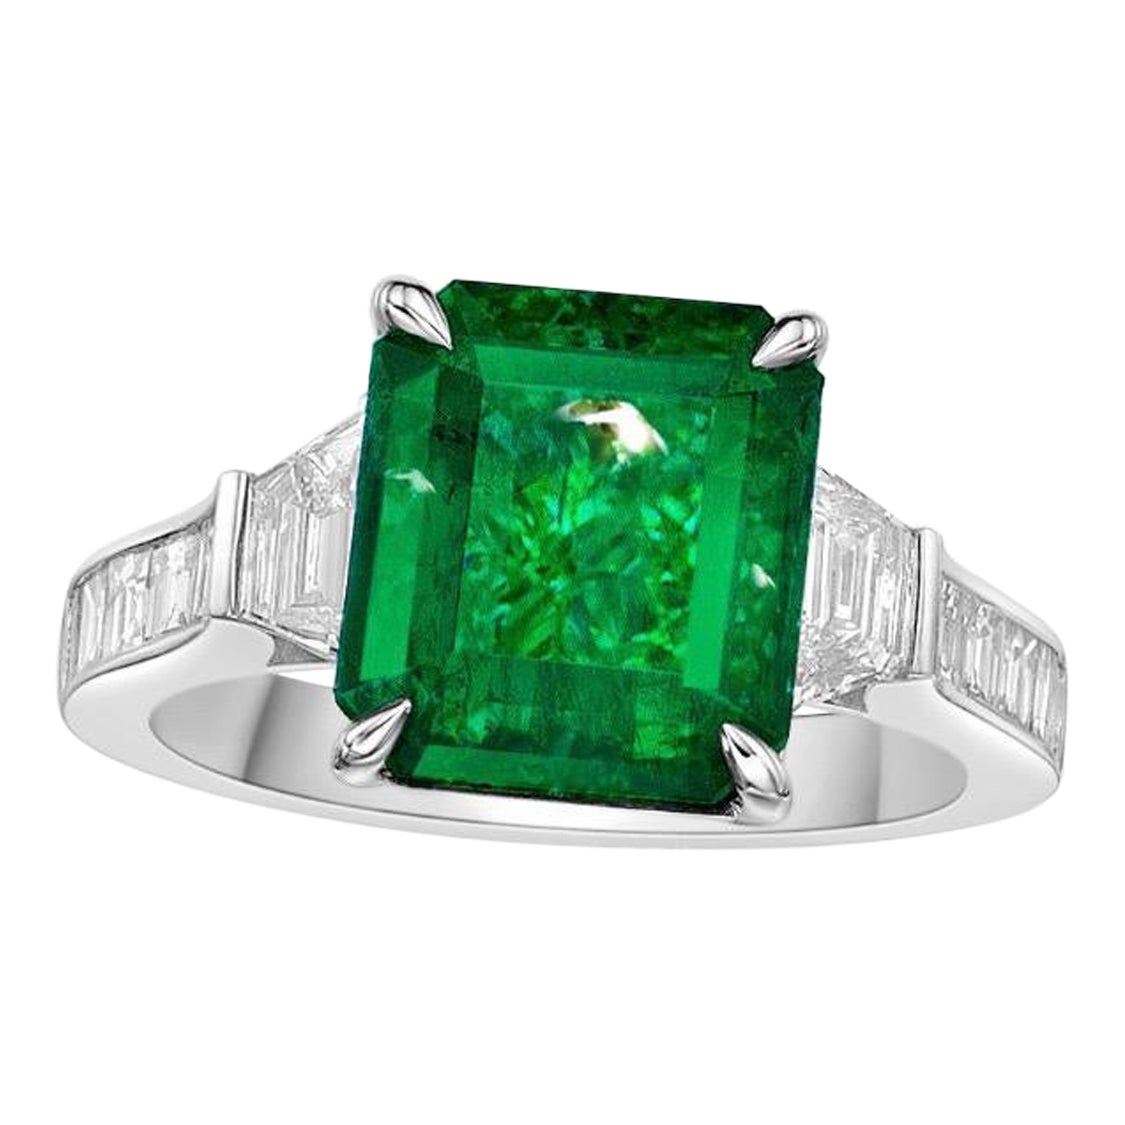 Emilio Jewelry Certified 5.94 Carat Vivid Green Muzo Colombian Emerald Ring  For Sale